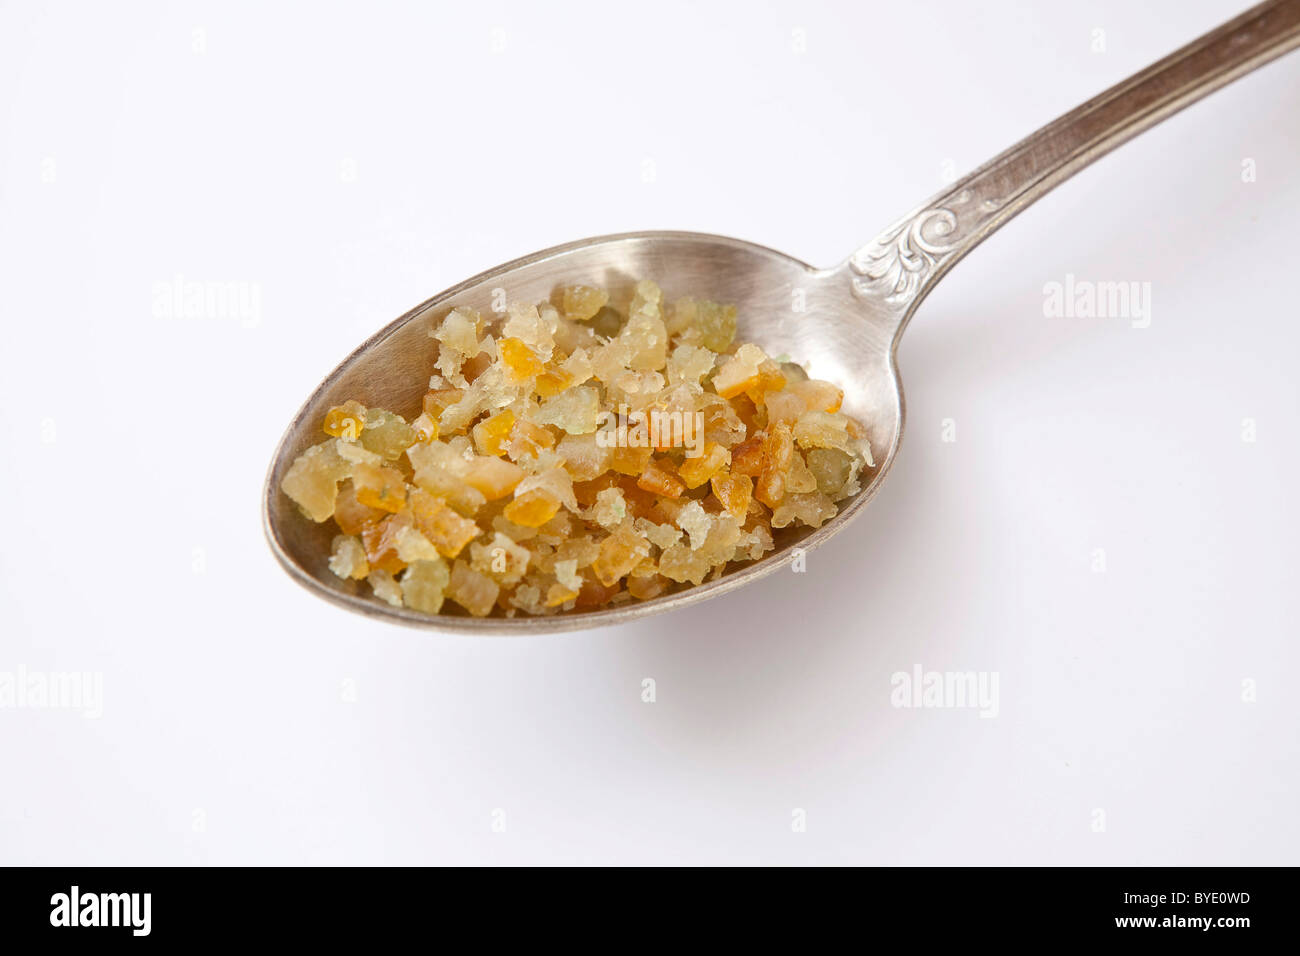 Candied lemon and orange peel, old silver spoon Stock Photo